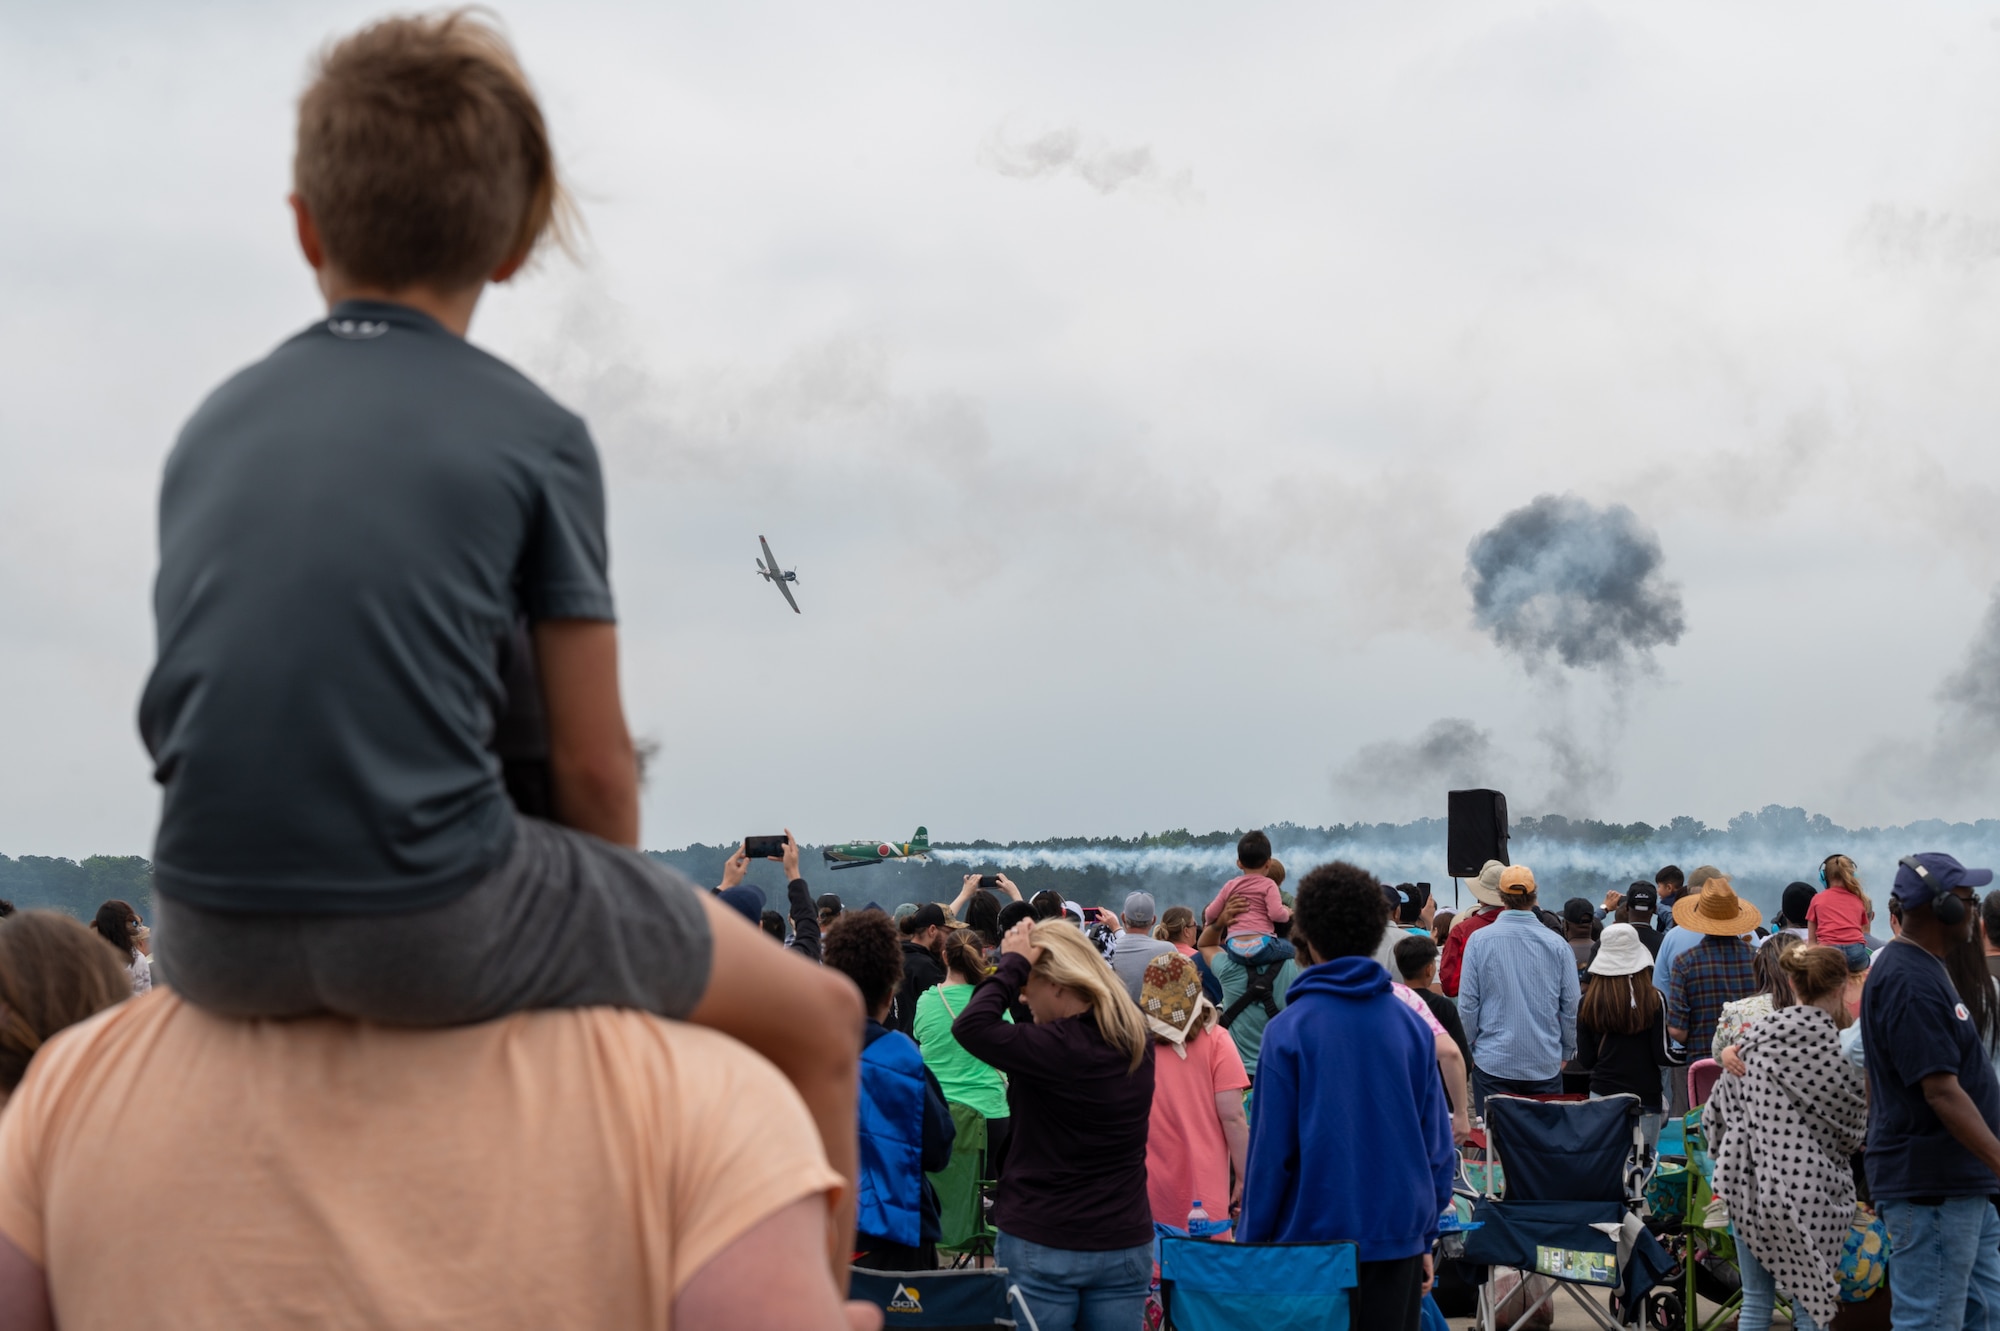 Spectators watch as various aircraft perform aerial maneuvers during the 2023 Wings Over Wayne air show at Seymour Johnson Air Force Base, North Carolina, May 21, 2023. Wings Over Wayne provides an opportunity for North Carolina residents and visitors from around the world to see how SJAFB builds to the future of airpower and displays a history of aircraft innovation and capabilities. (U.S. Air Force photo by Airman 1st Class Leighton Lucero)